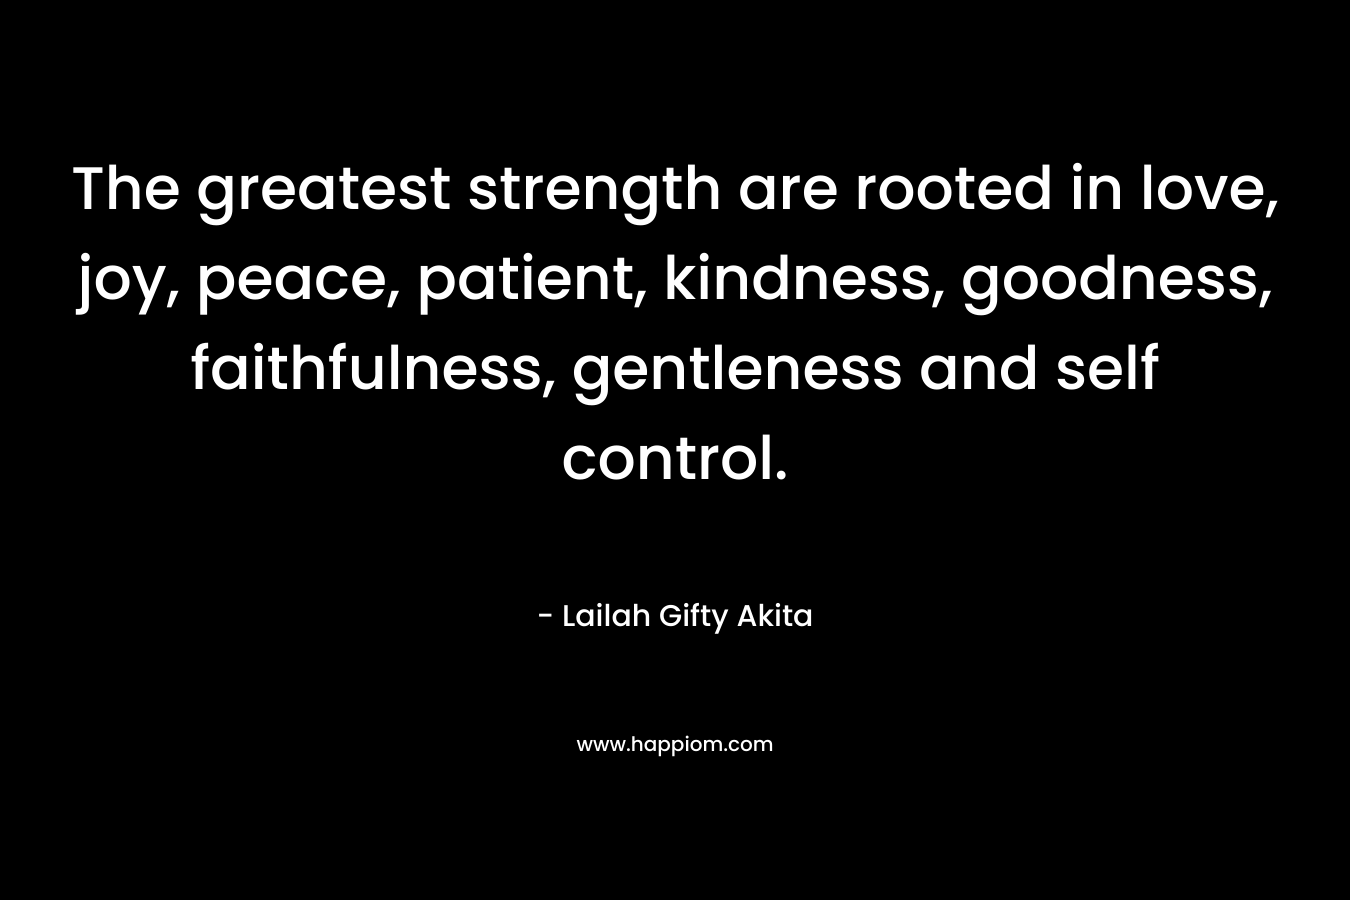 The greatest strength are rooted in love, joy, peace, patient, kindness, goodness, faithfulness, gentleness and self control.